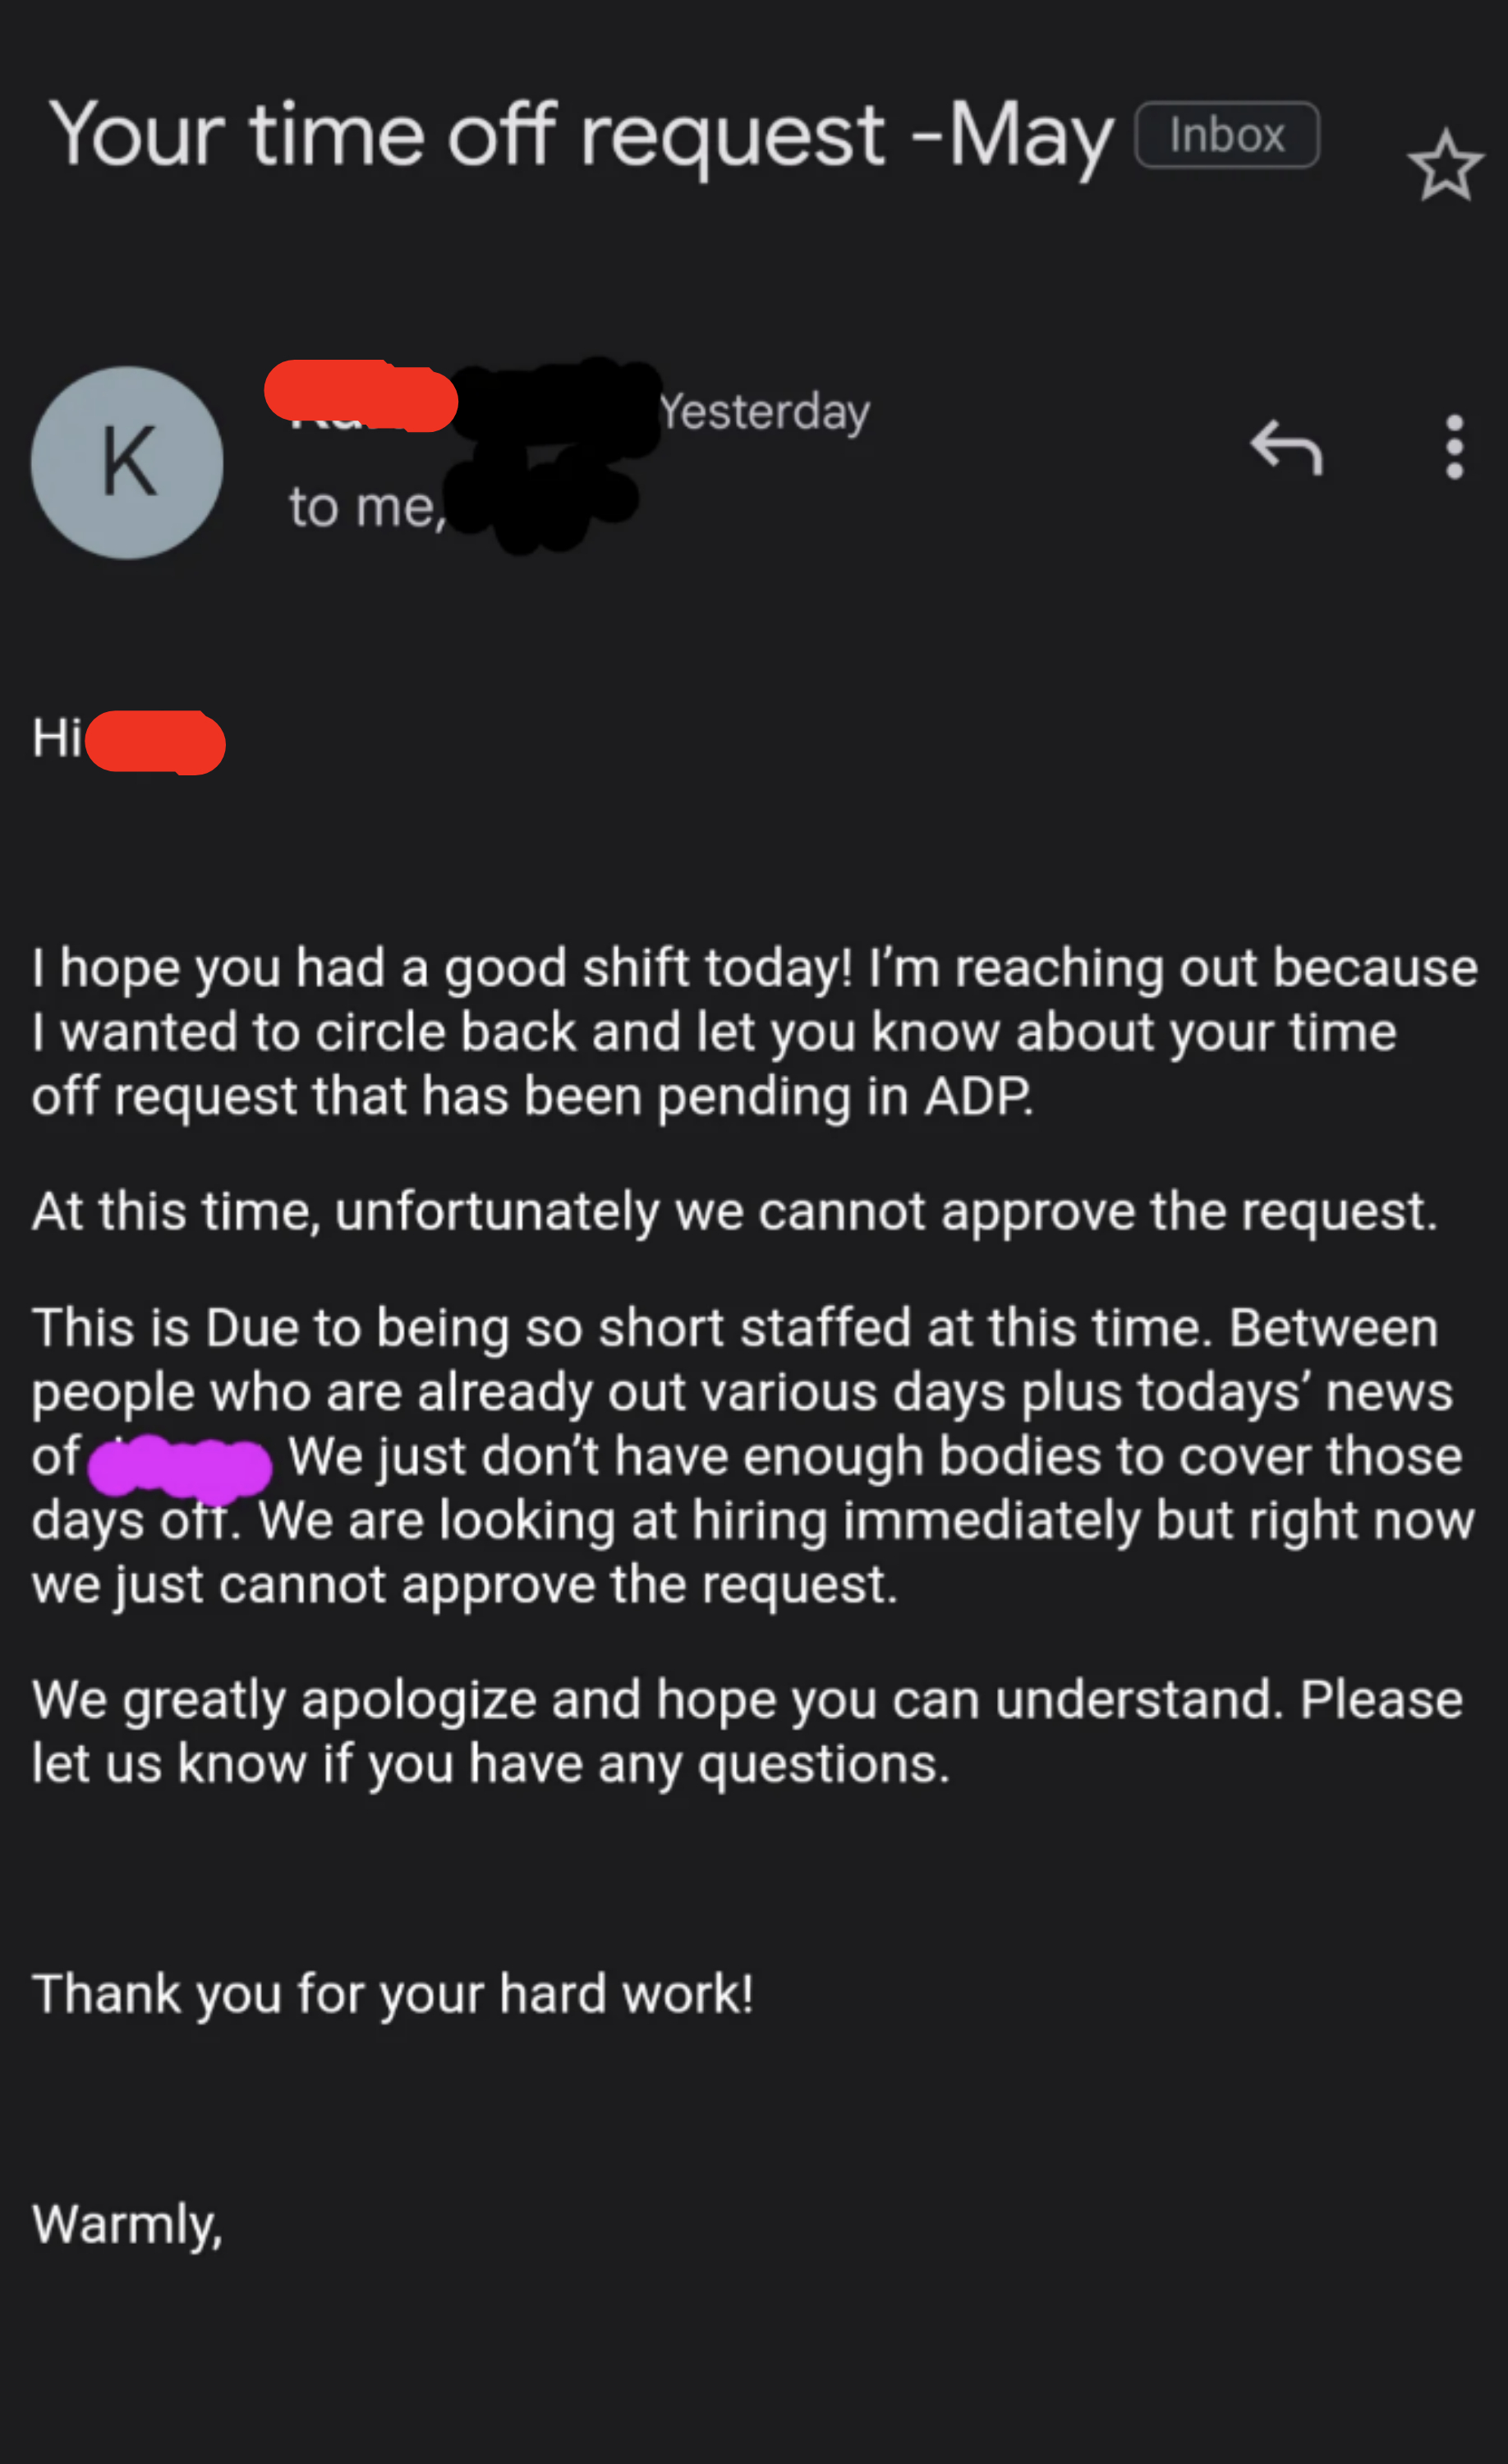 Boss refusing employee&#x27;s time-off request